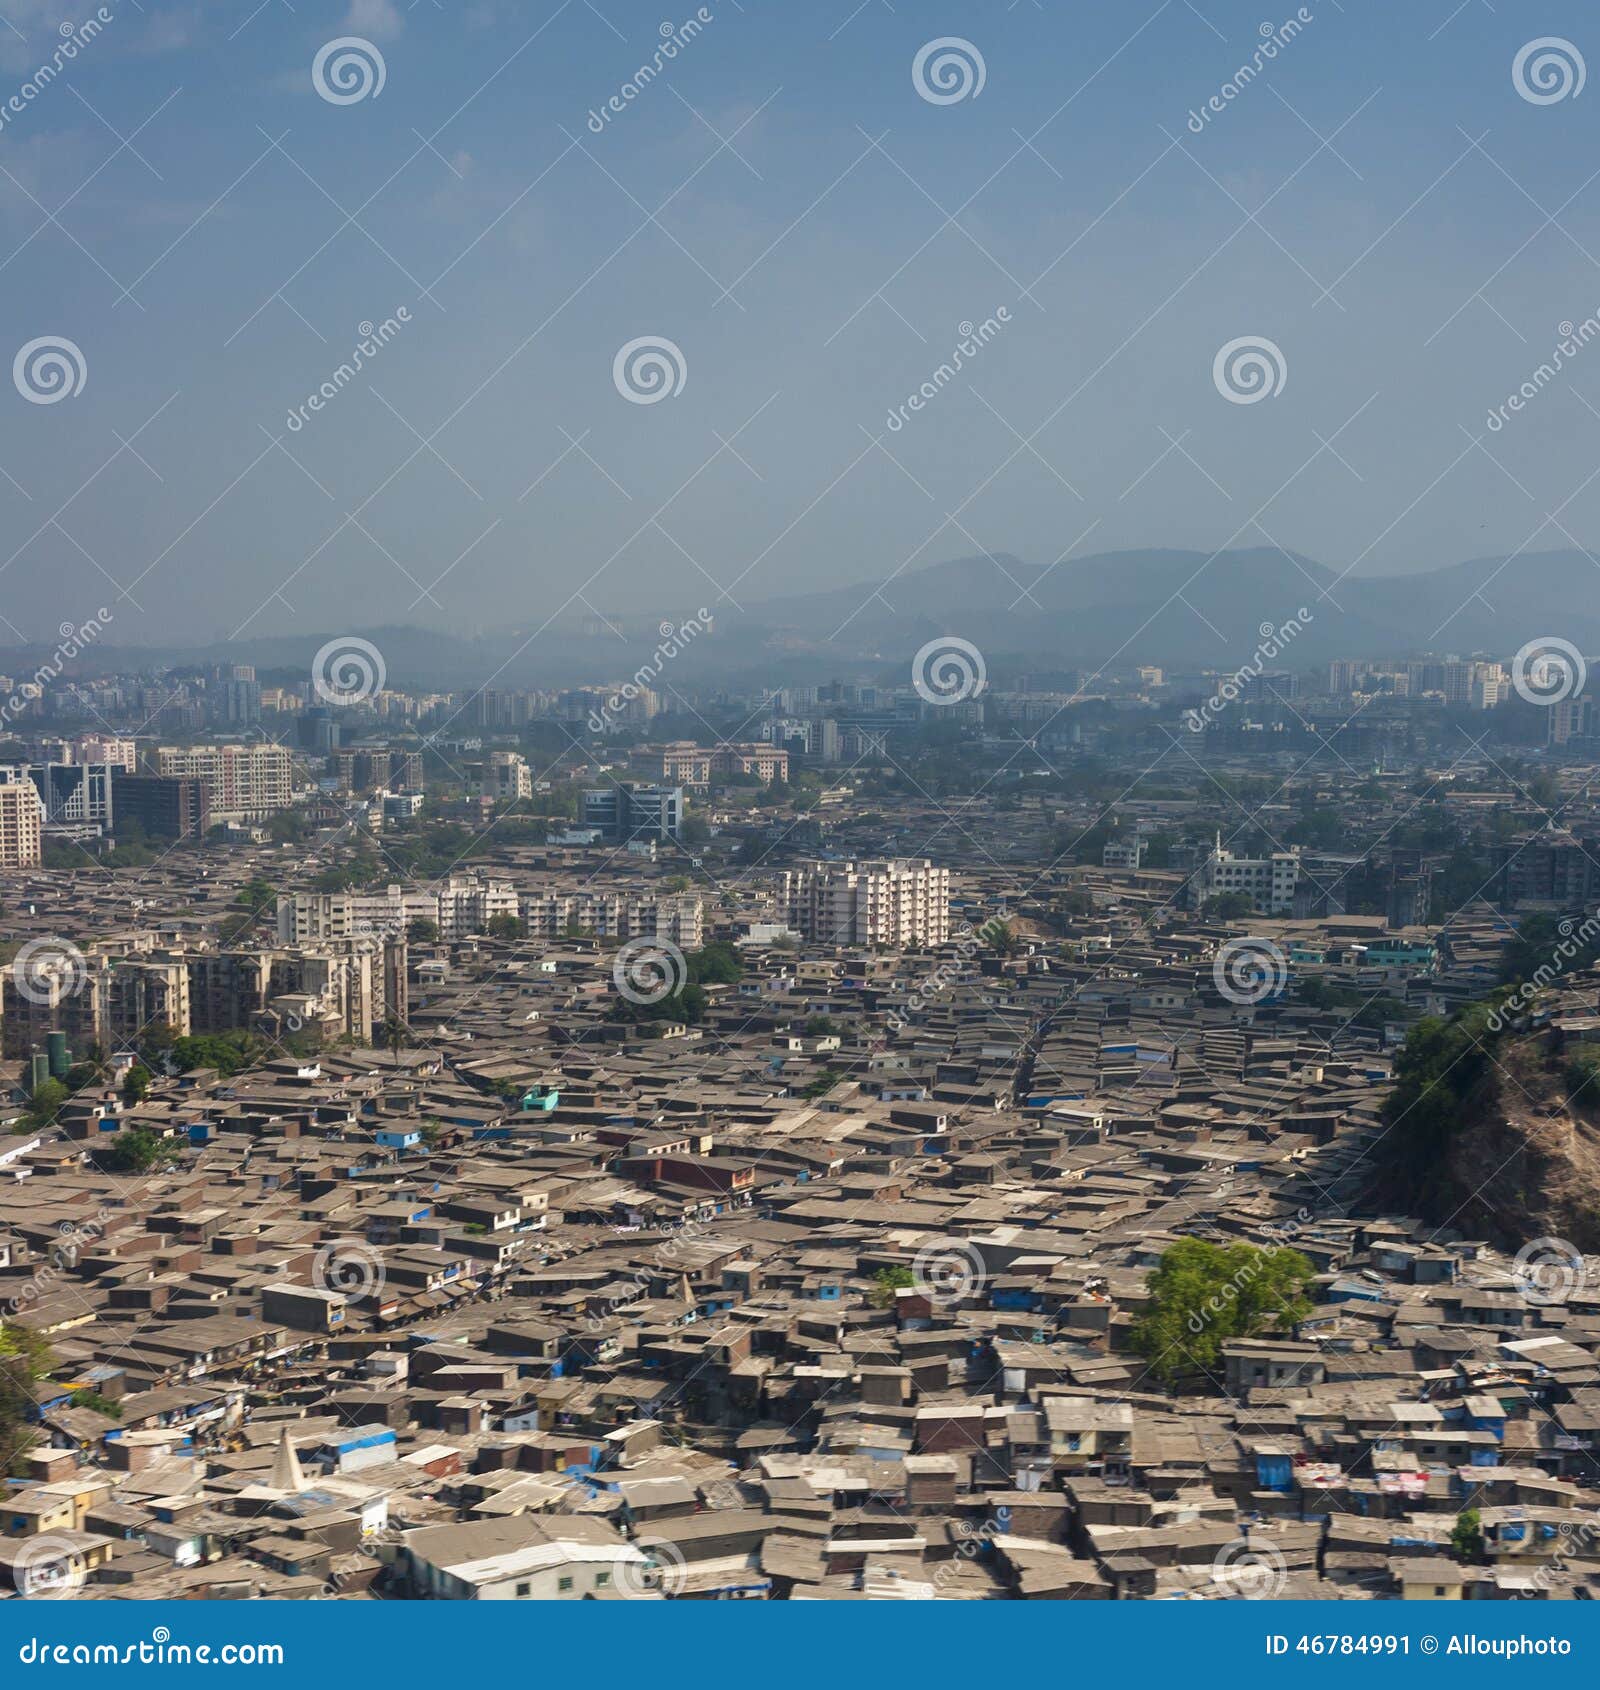 aerial-view-mumbai-slums-seen-air-fill-every-gap-larger-residential-buildings-offices-46784991.jpg